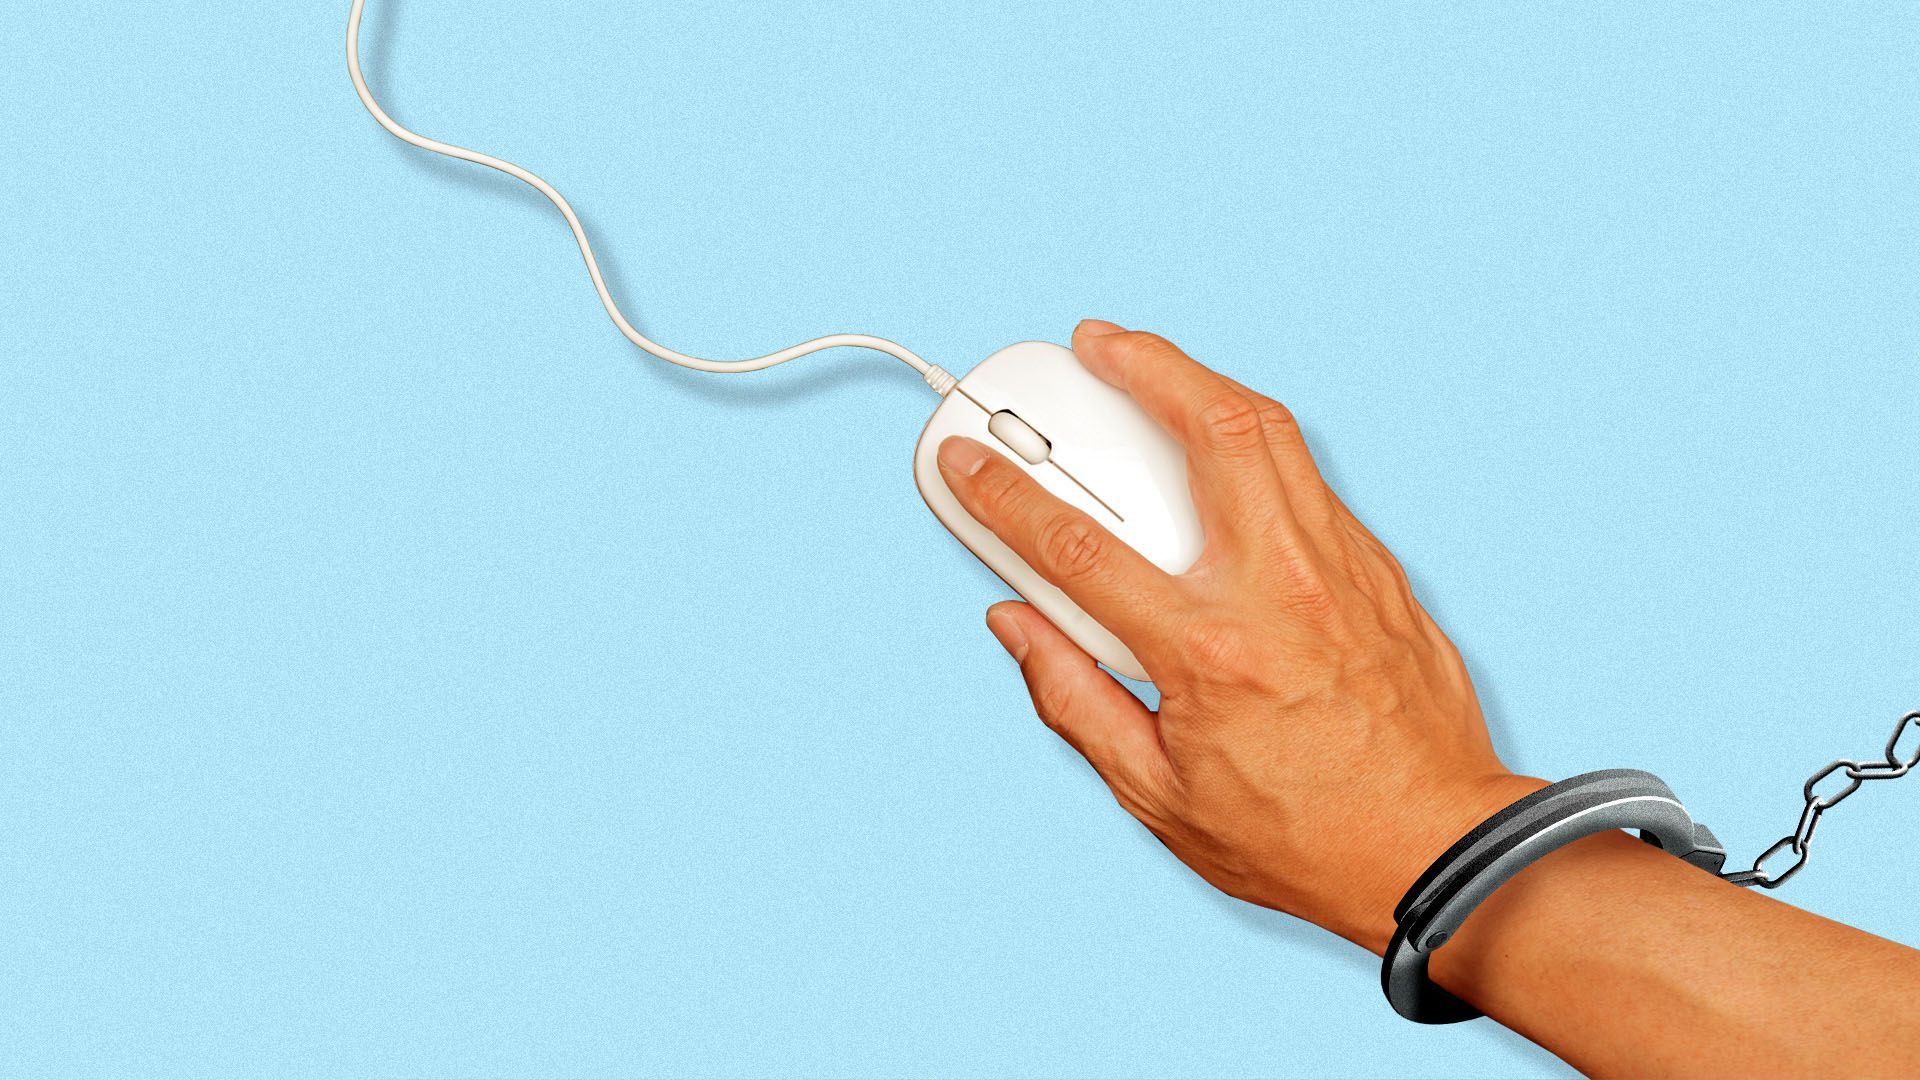 Illustration of a hand on a mouse with a handcuff on the wrist